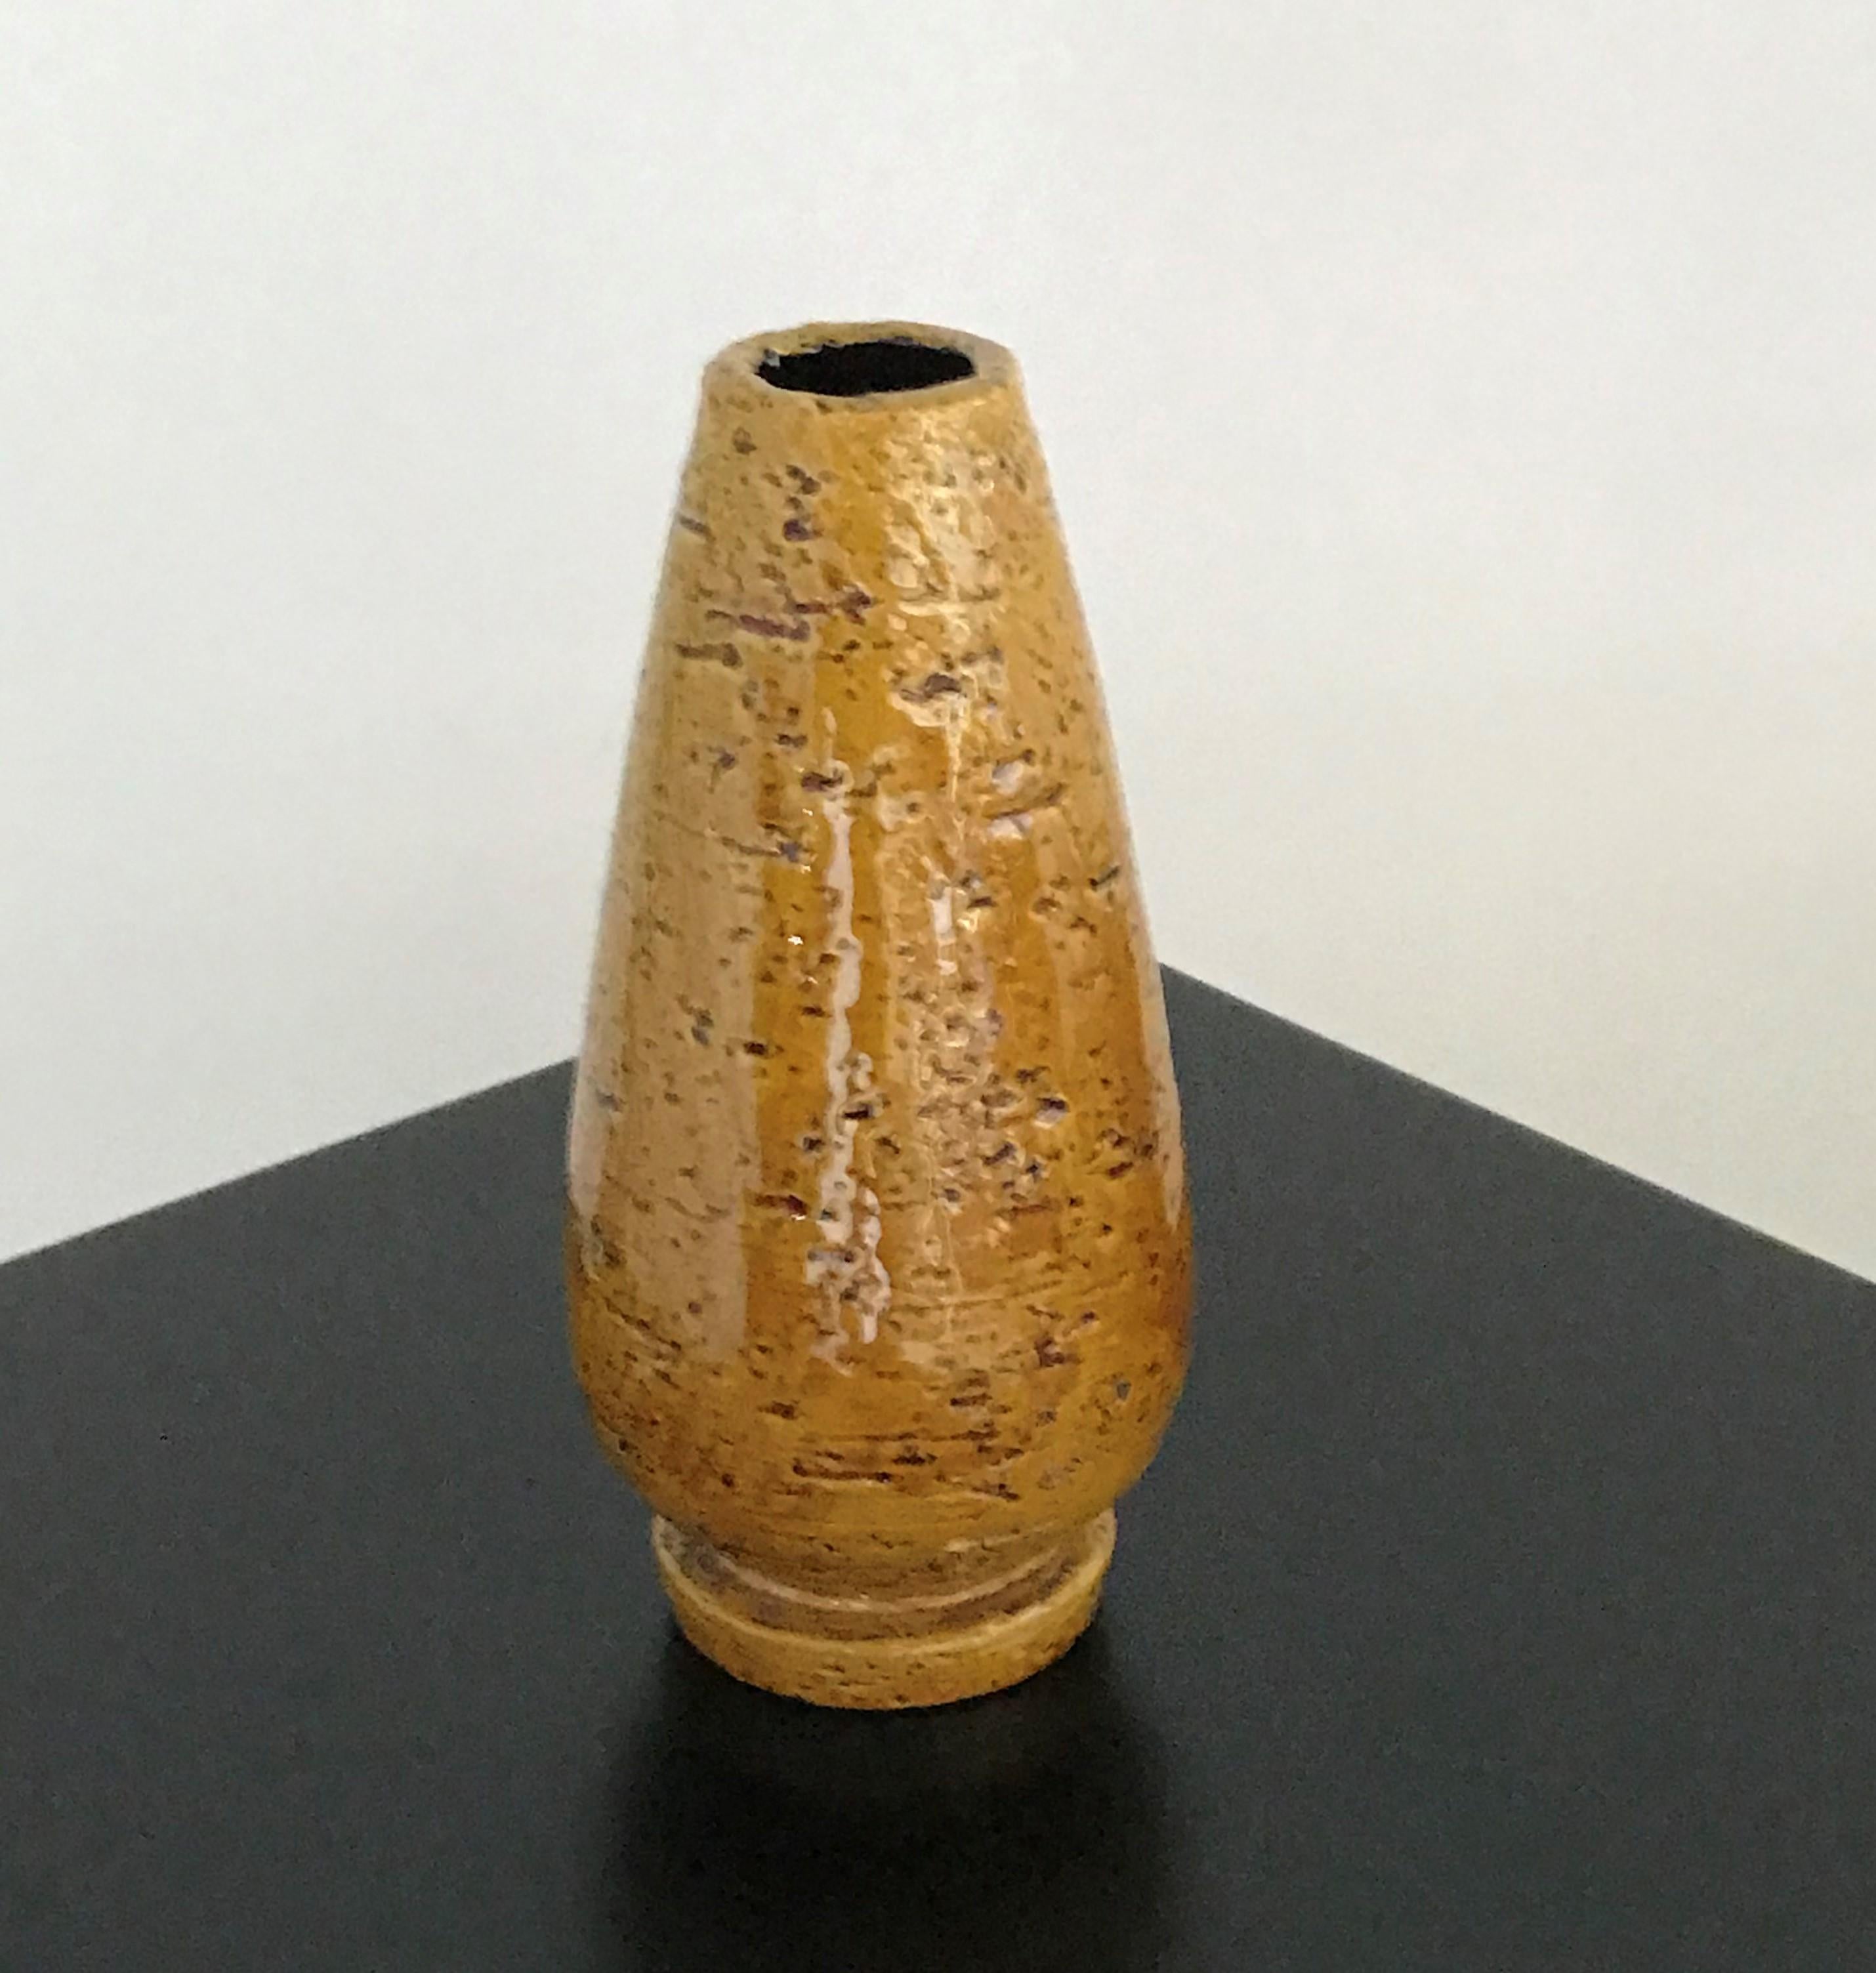 REDUCED FROM $350...Exquisite creation by Gunnar Nylund (1914–1997) during his tenure as artistic director of Rörstrand from 1932 through the 1950s. The vase has a glossy spicy mustard yellow glaze over a rough rustic body creating a smooth touch